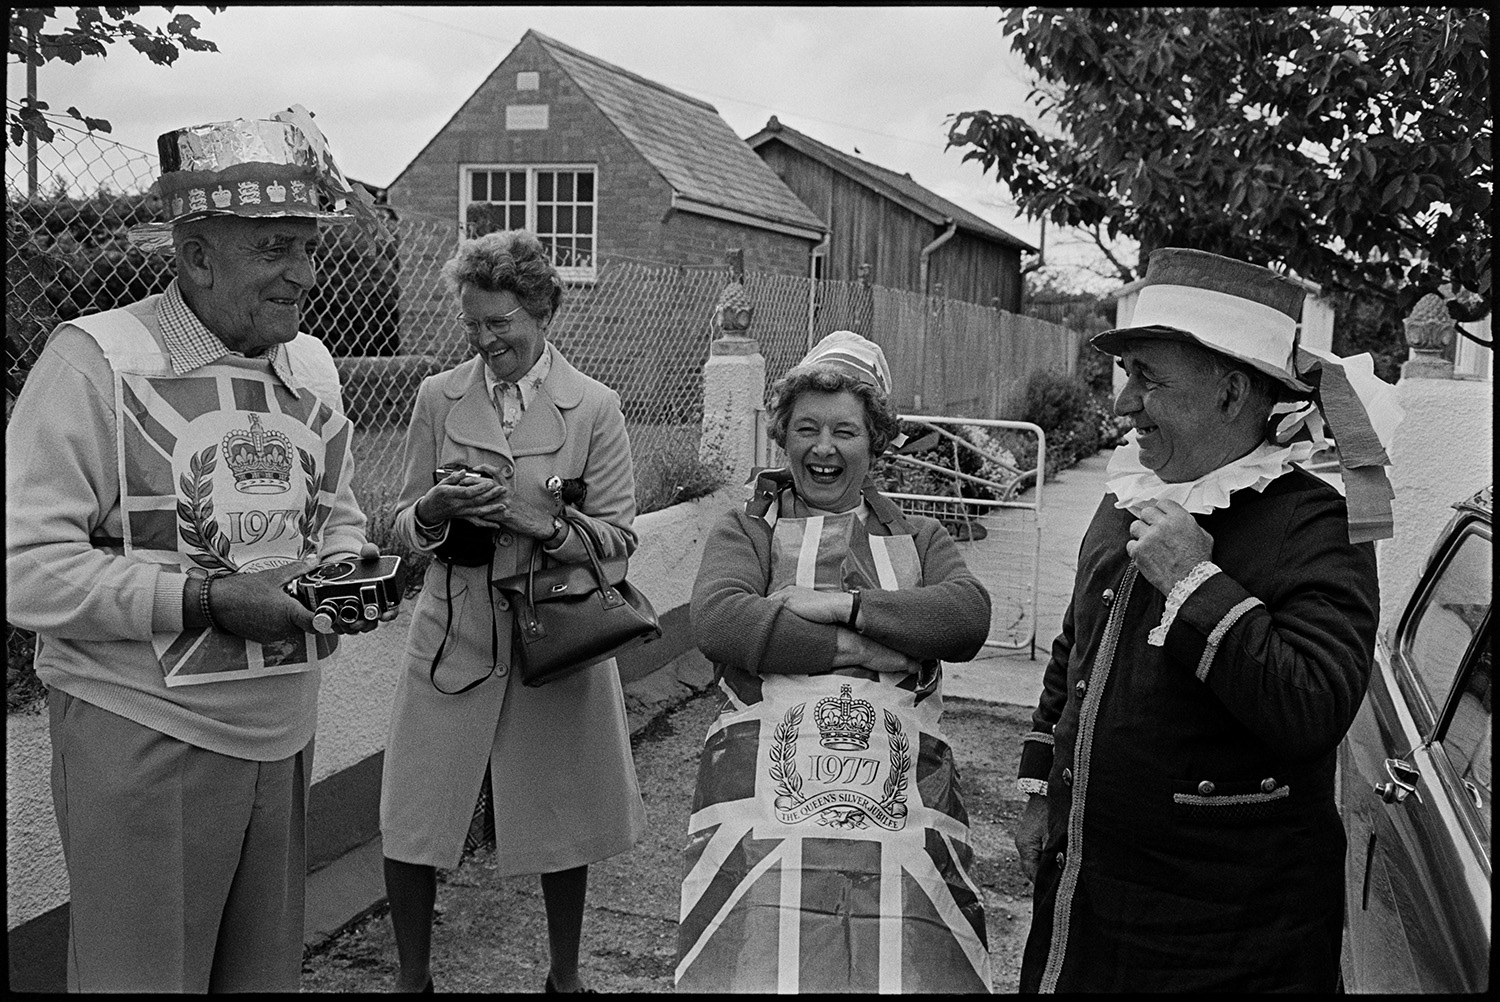 People chatting after Jubilee cake ceremony. 
[Two men and two women talking and laughing after parading a giant cake through Dolton to celebrate the Silver Jubilee of Queen Elizabeth II. Dorothy Hiscock I stood in the centre wearing an apron with a Union Jack motif. The men are wearing decorated hats and one of them is holding a camera.]